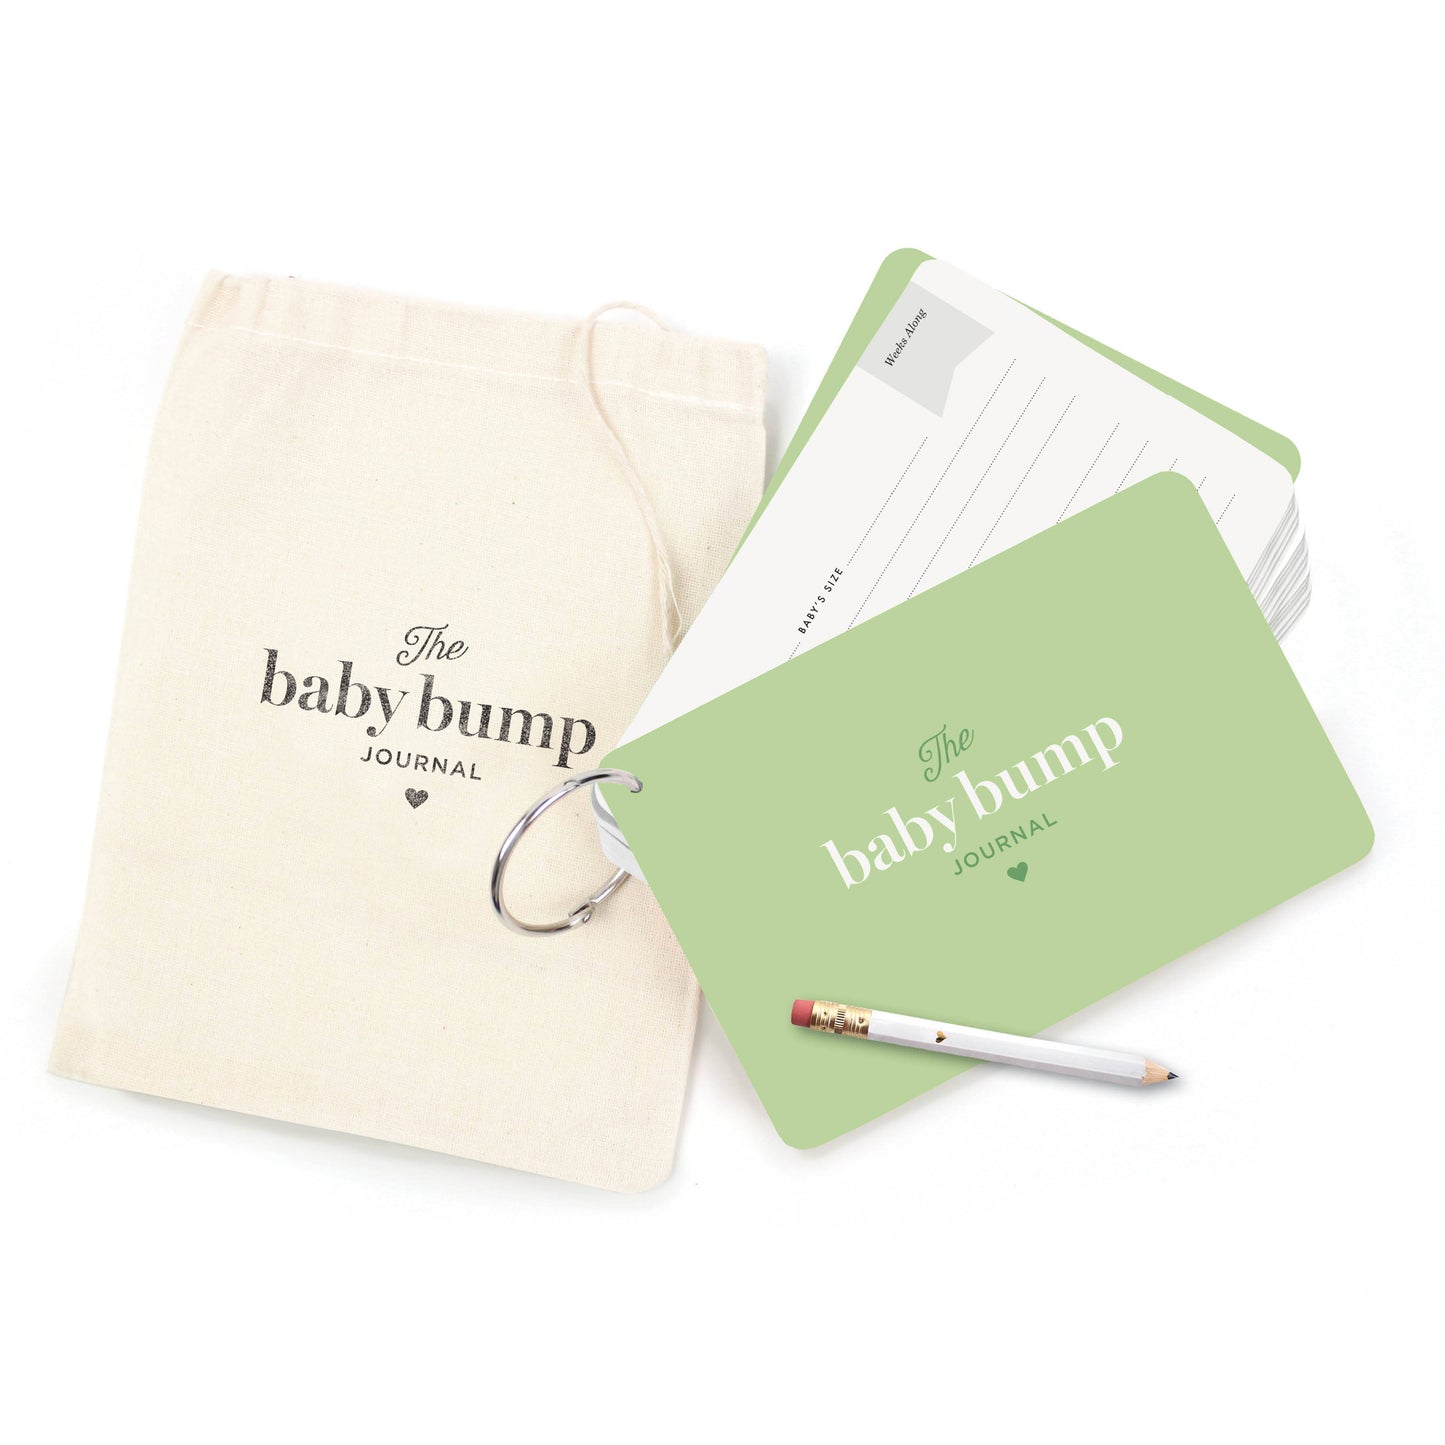 Inklings Paperie Journal: The Baby Bump Journal